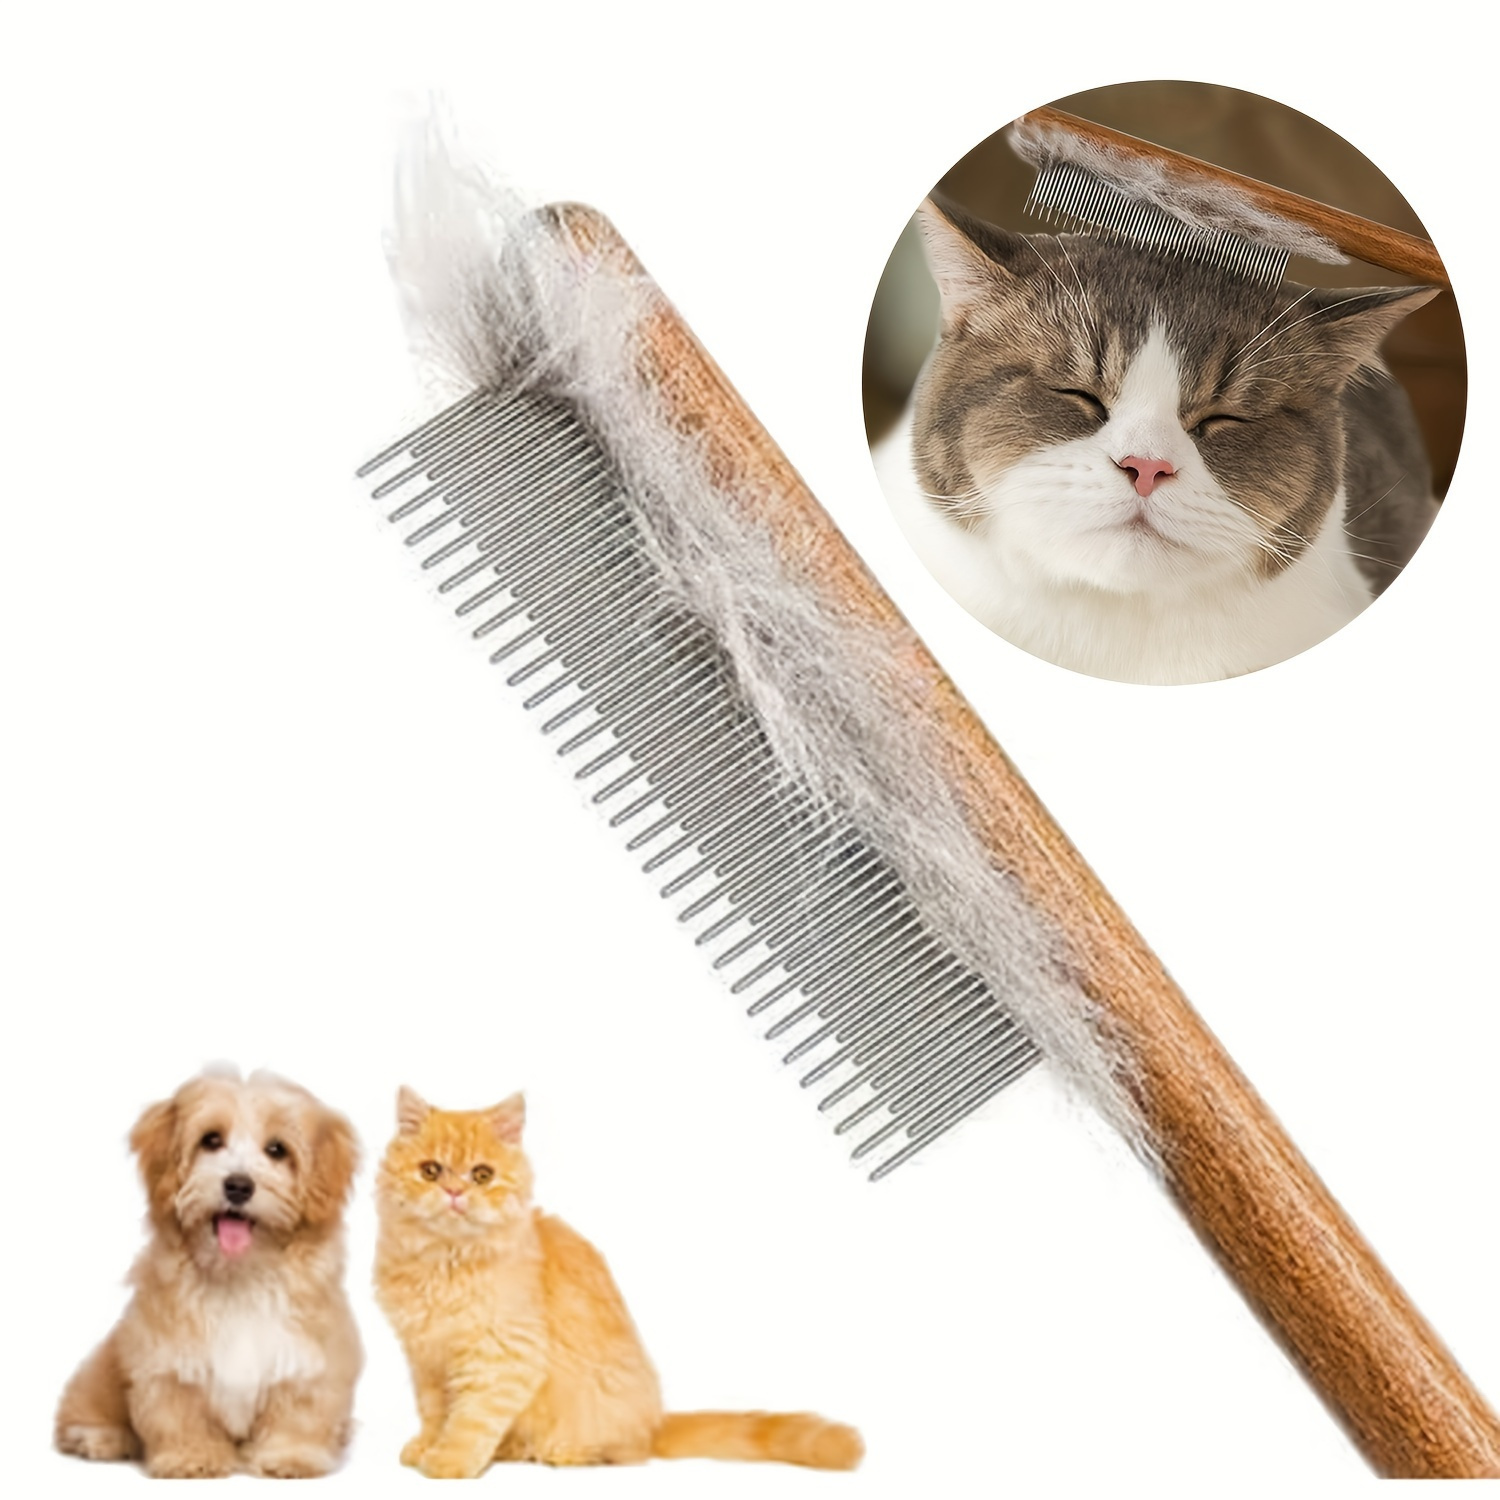 

1pc Cat Hair Removal Comb, Floating Hair Removal Brush With Wooden Handle, Grooming Tool For Dogs, Cats, And Small Pets